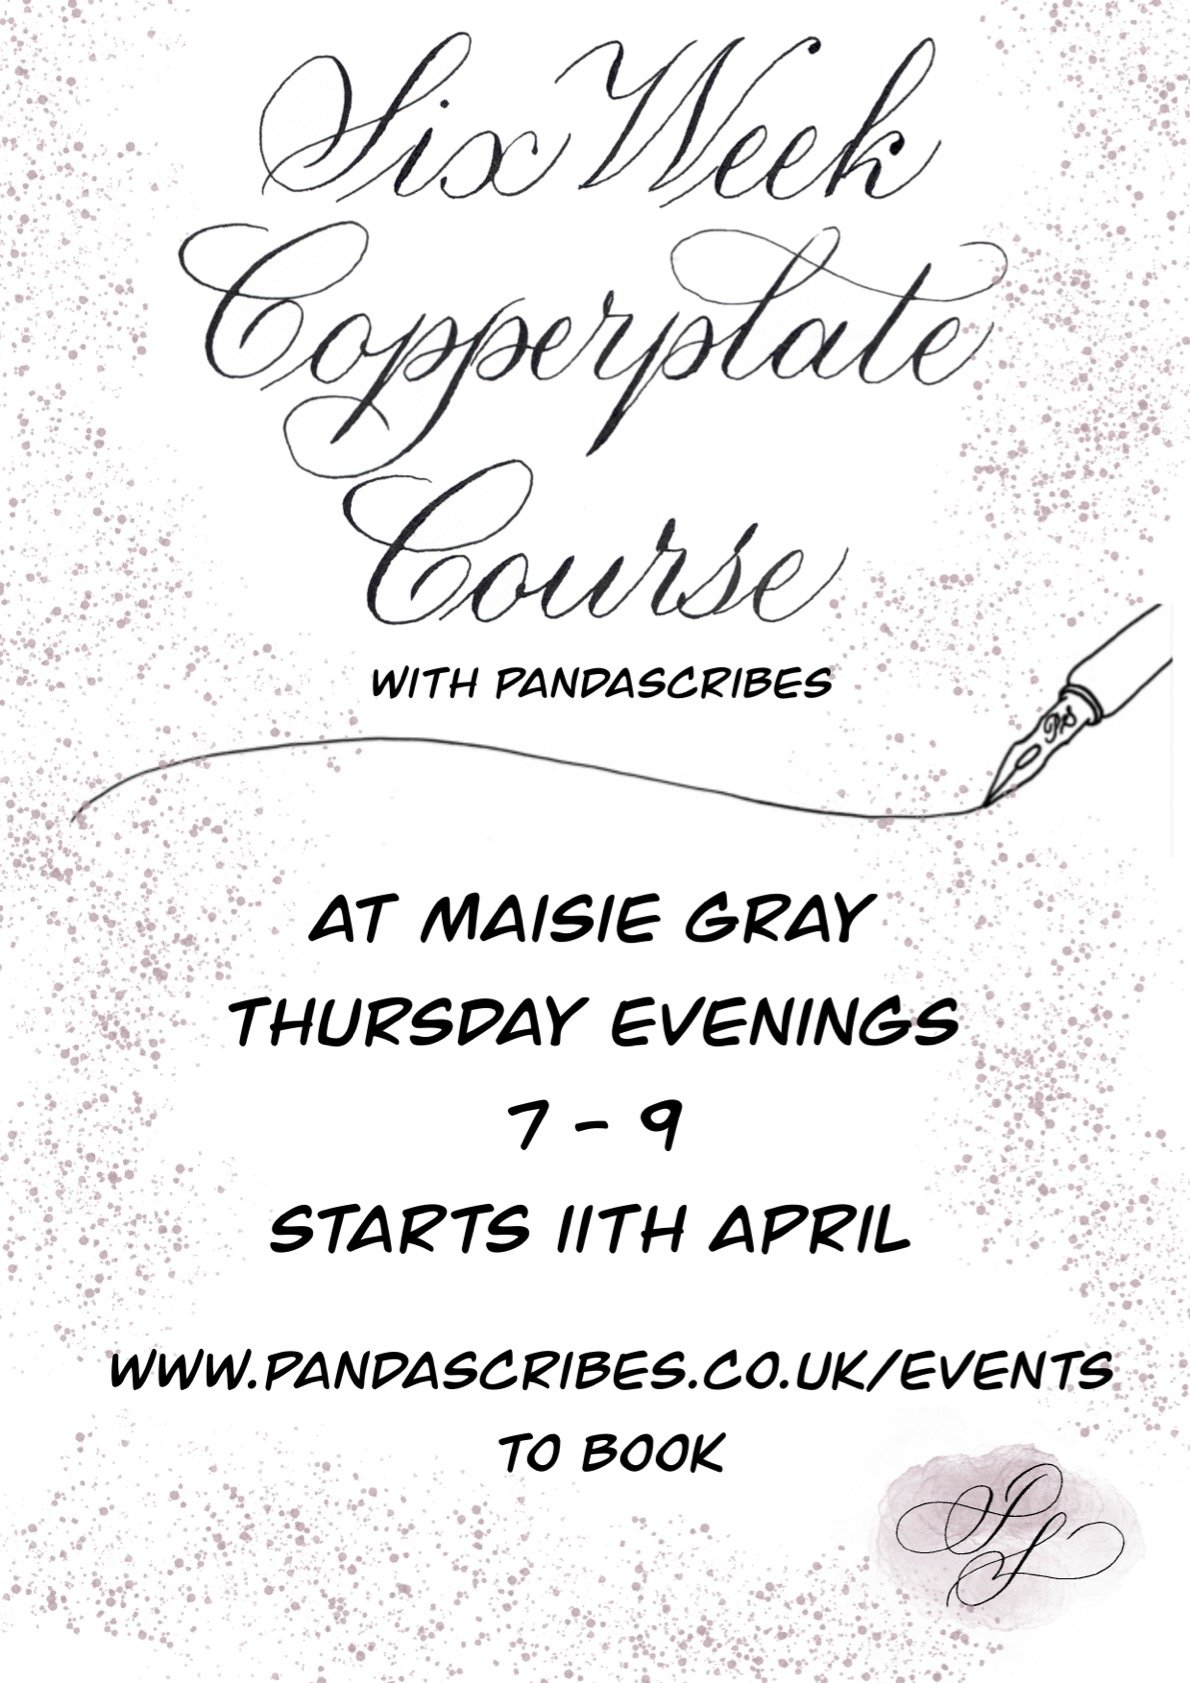 Six Week Copperplate Course